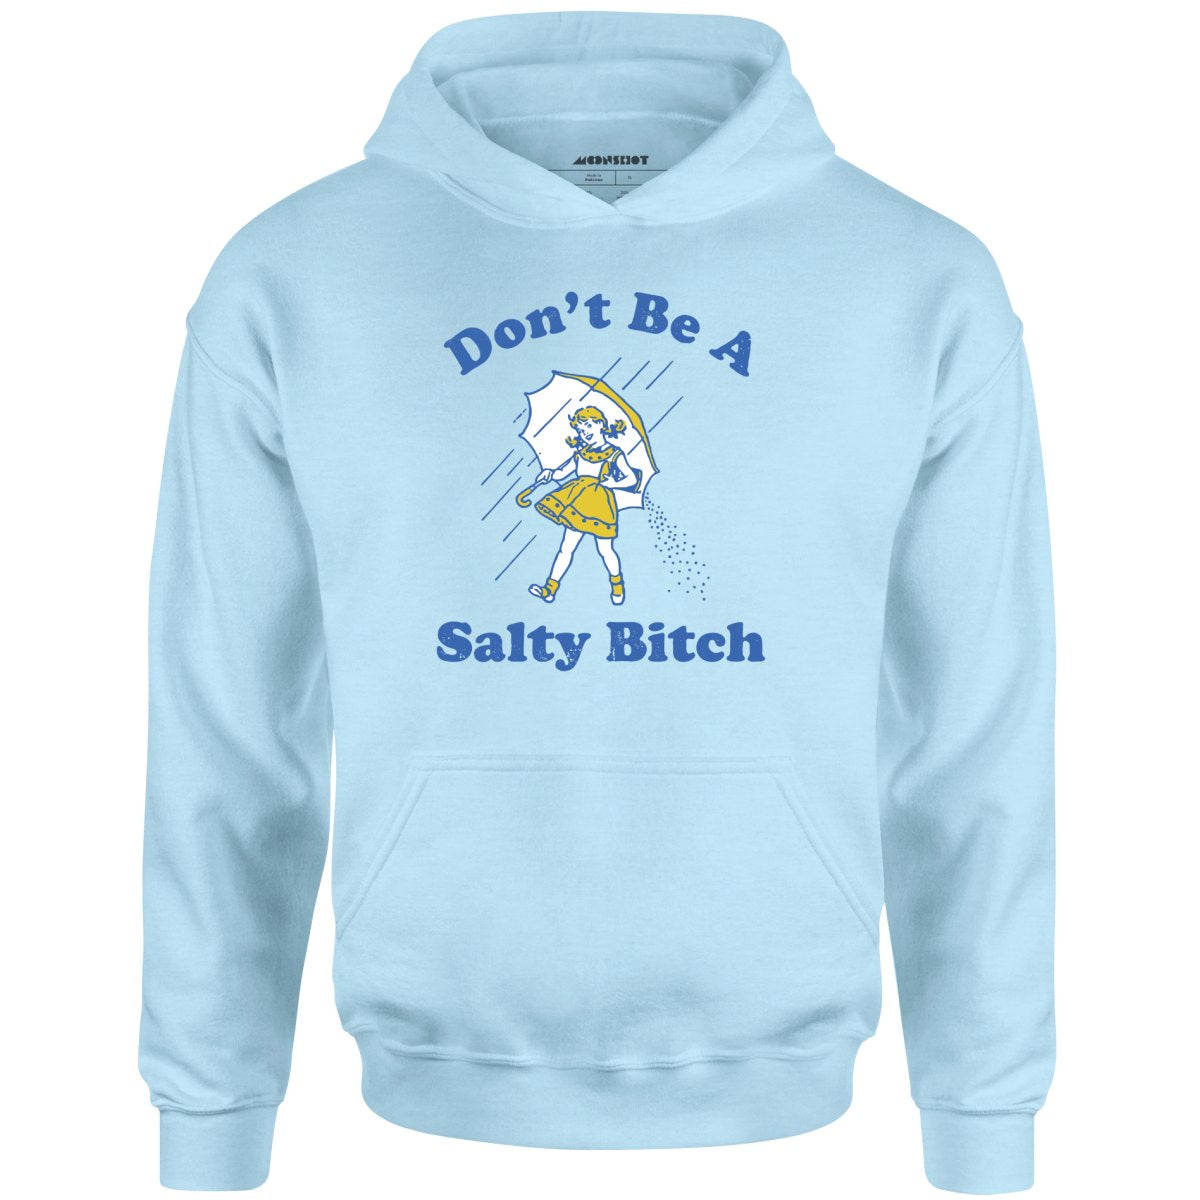 Don't Be a Salty Bitch - Unisex Hoodie